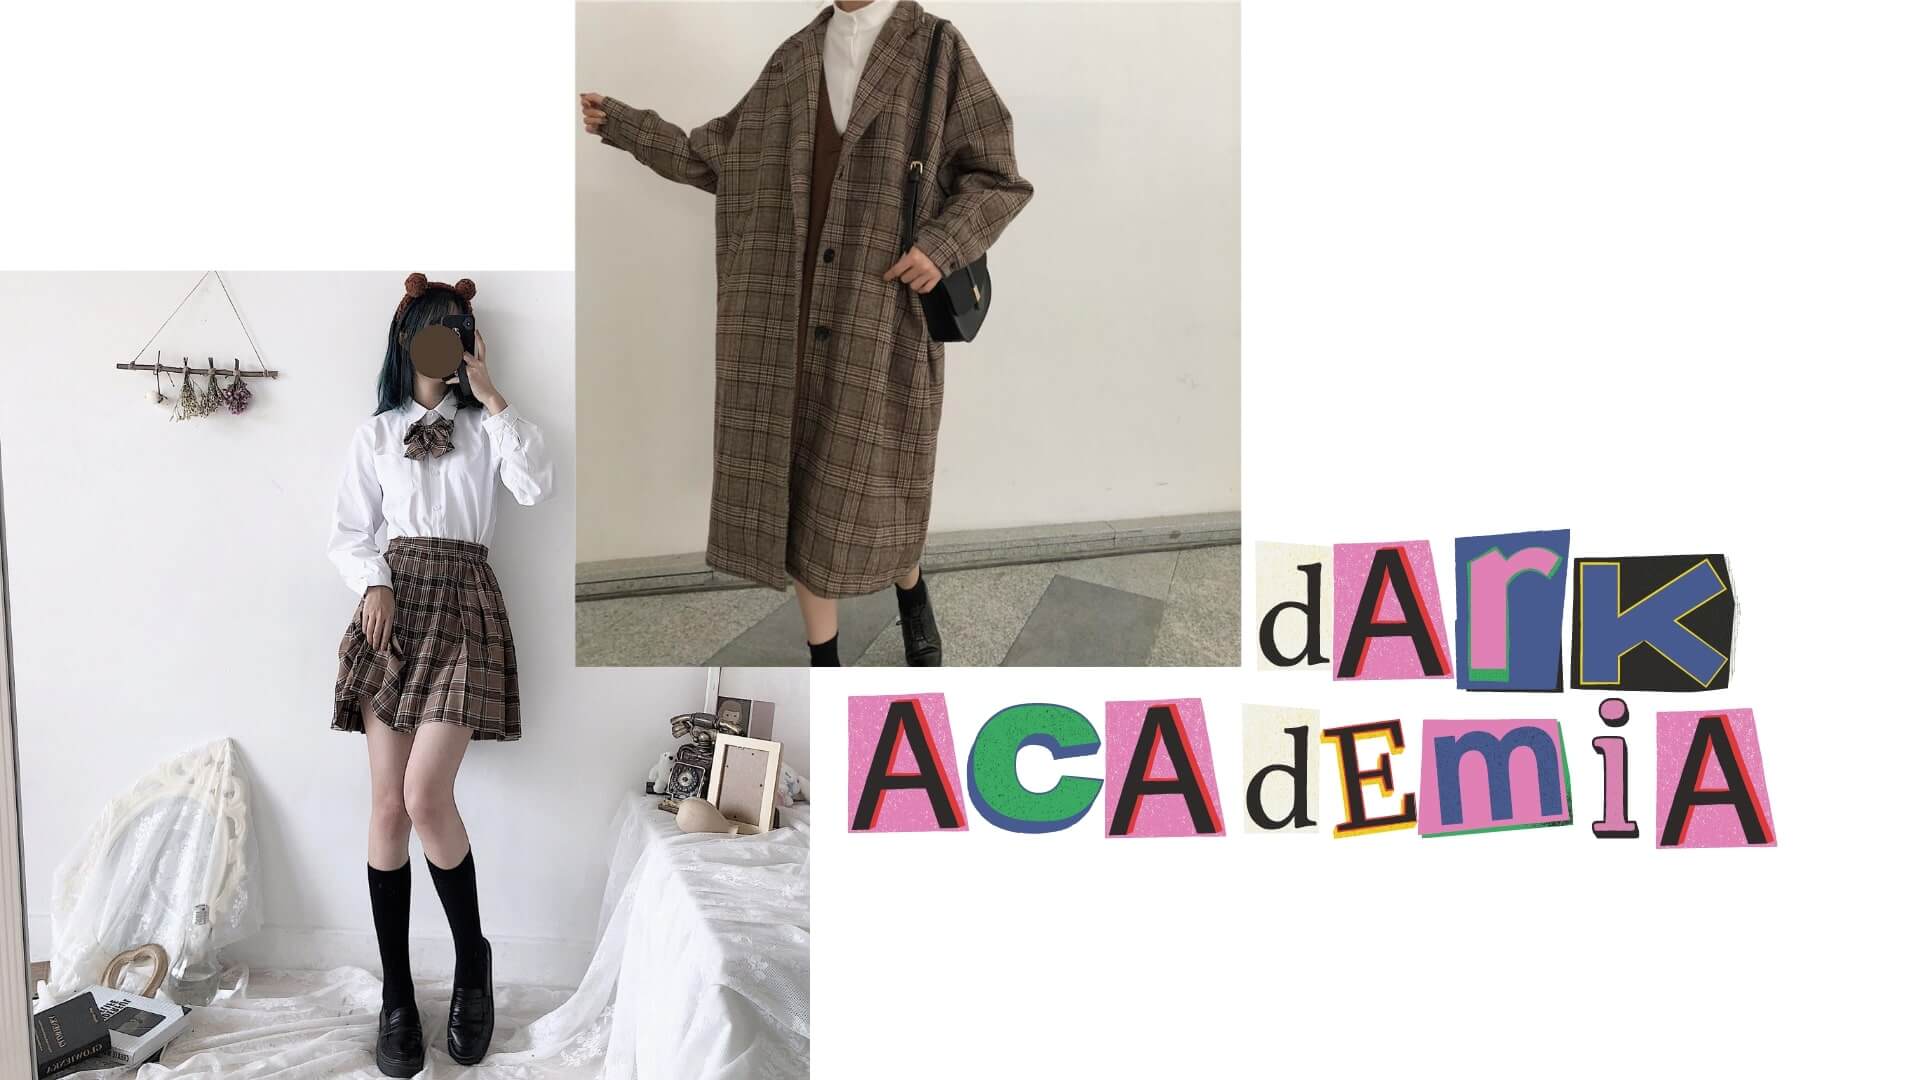 11 fall 2021 style trends for you - dark academia